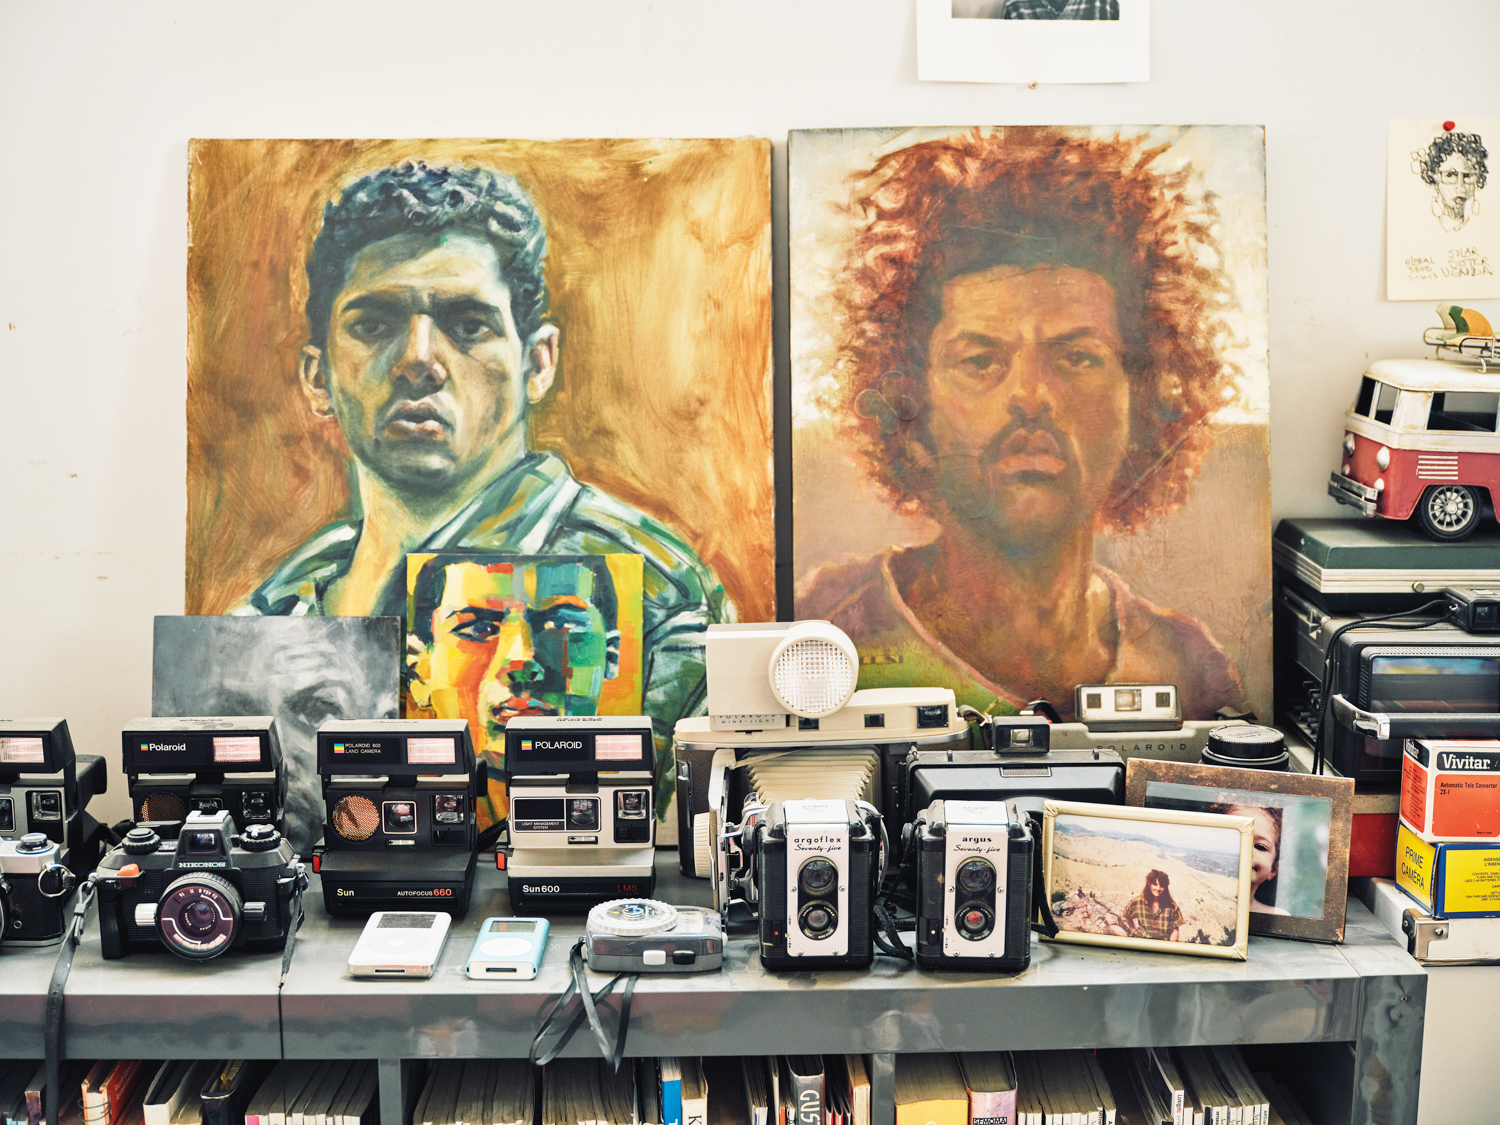 Two painted portraits by Michael Gadlin over a collection of vintage cameras.